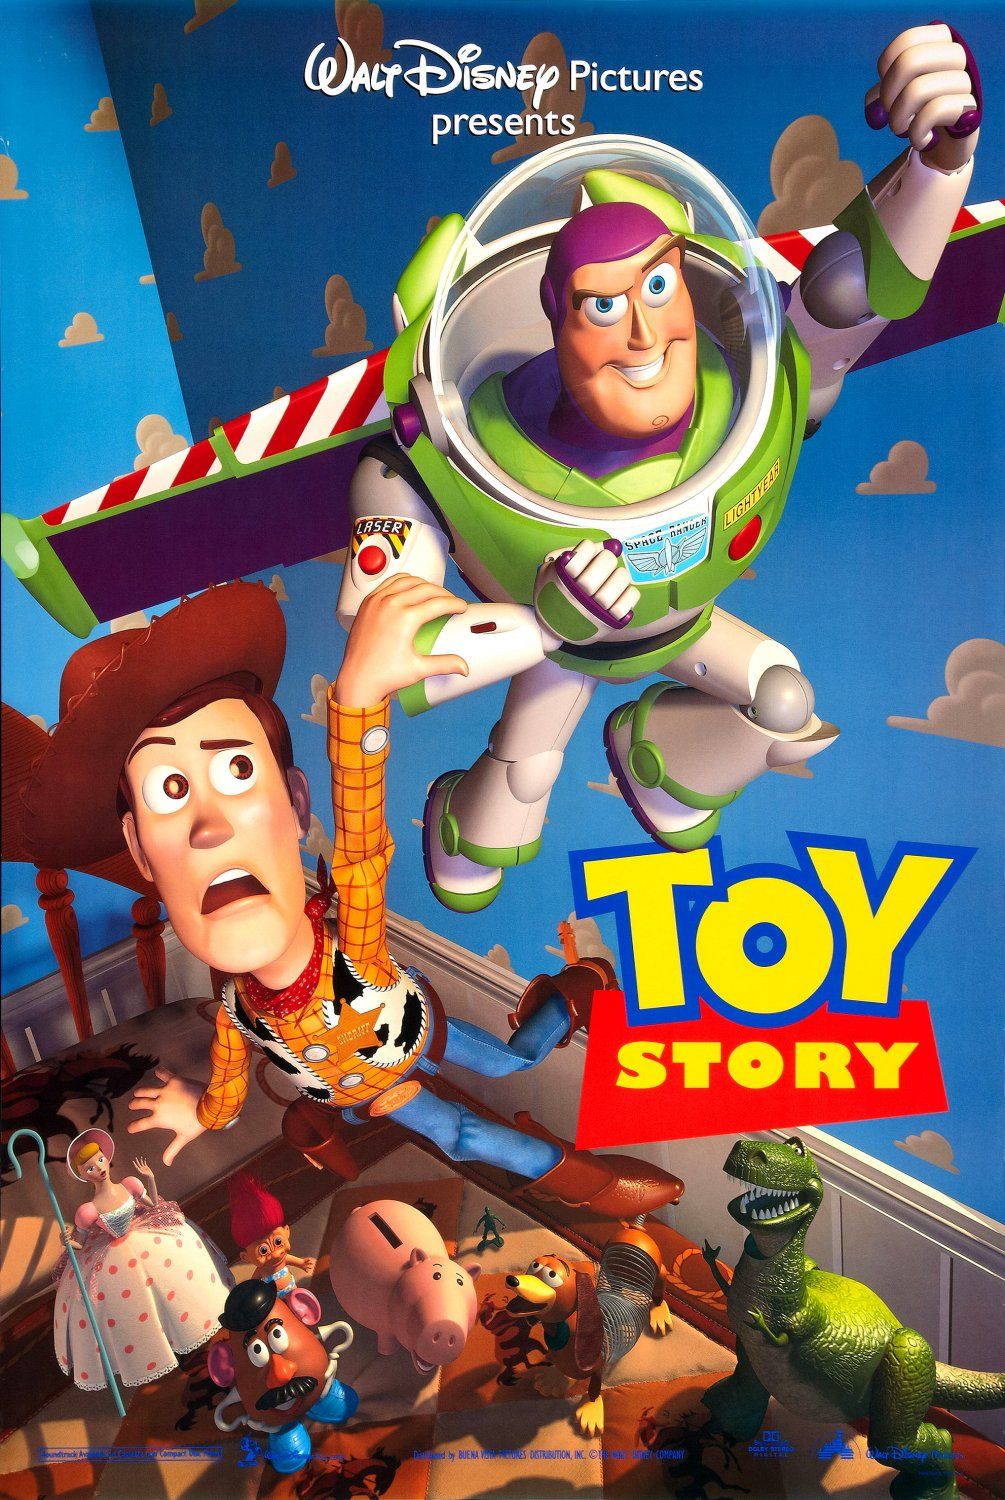 Woody, Buzz and the gang in Toy Story movie poster